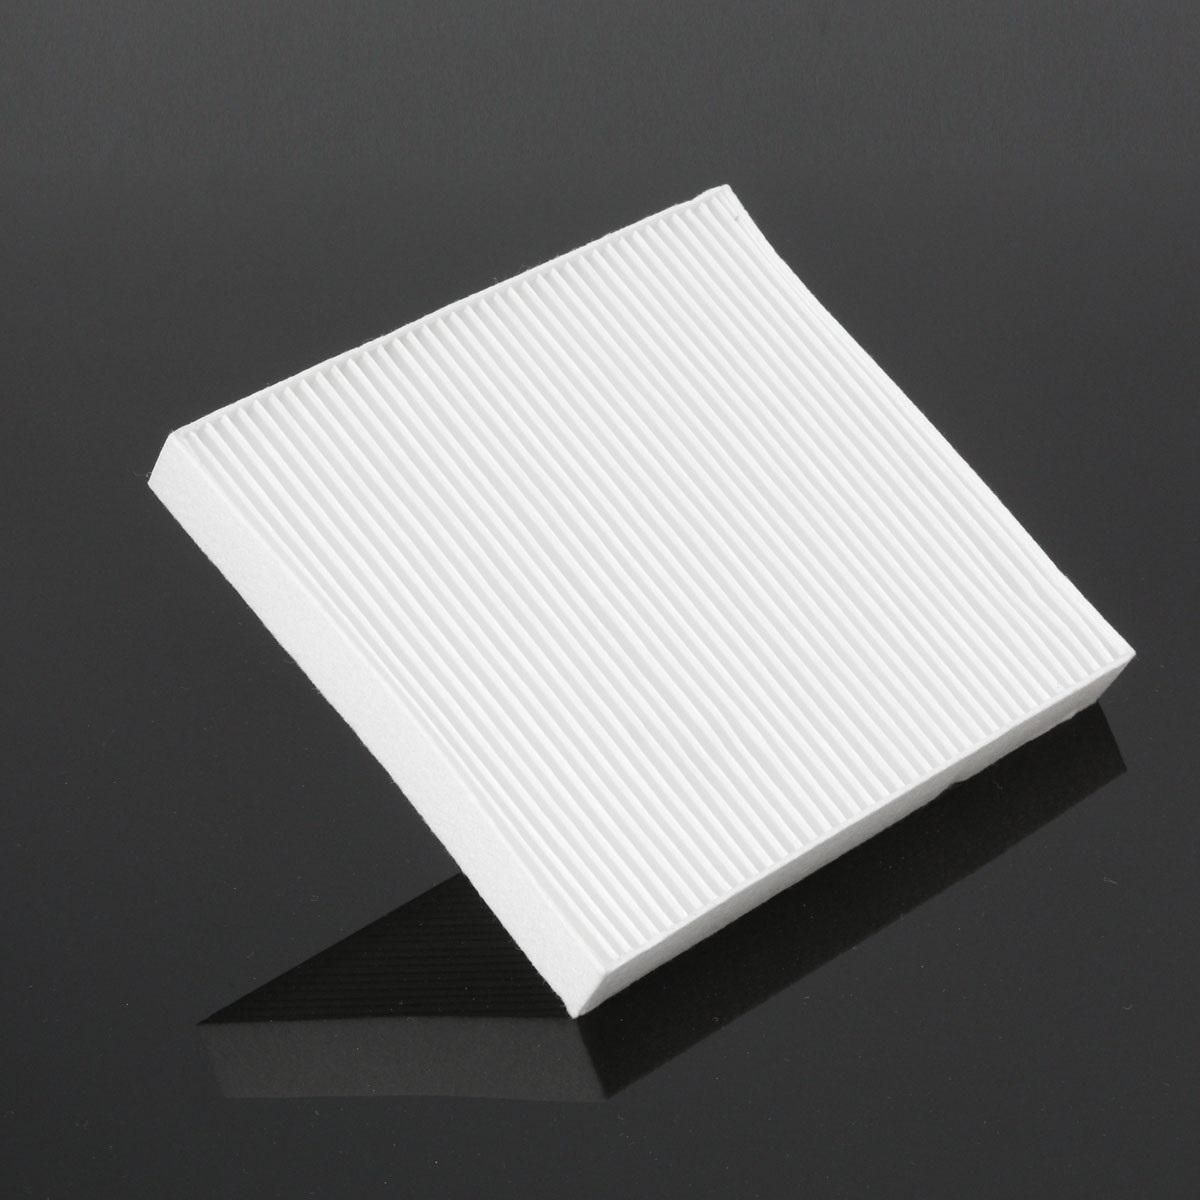 Yulicoauto AIR COND CABIN AIR FILTER for Toyota Innova Year 2005-2015